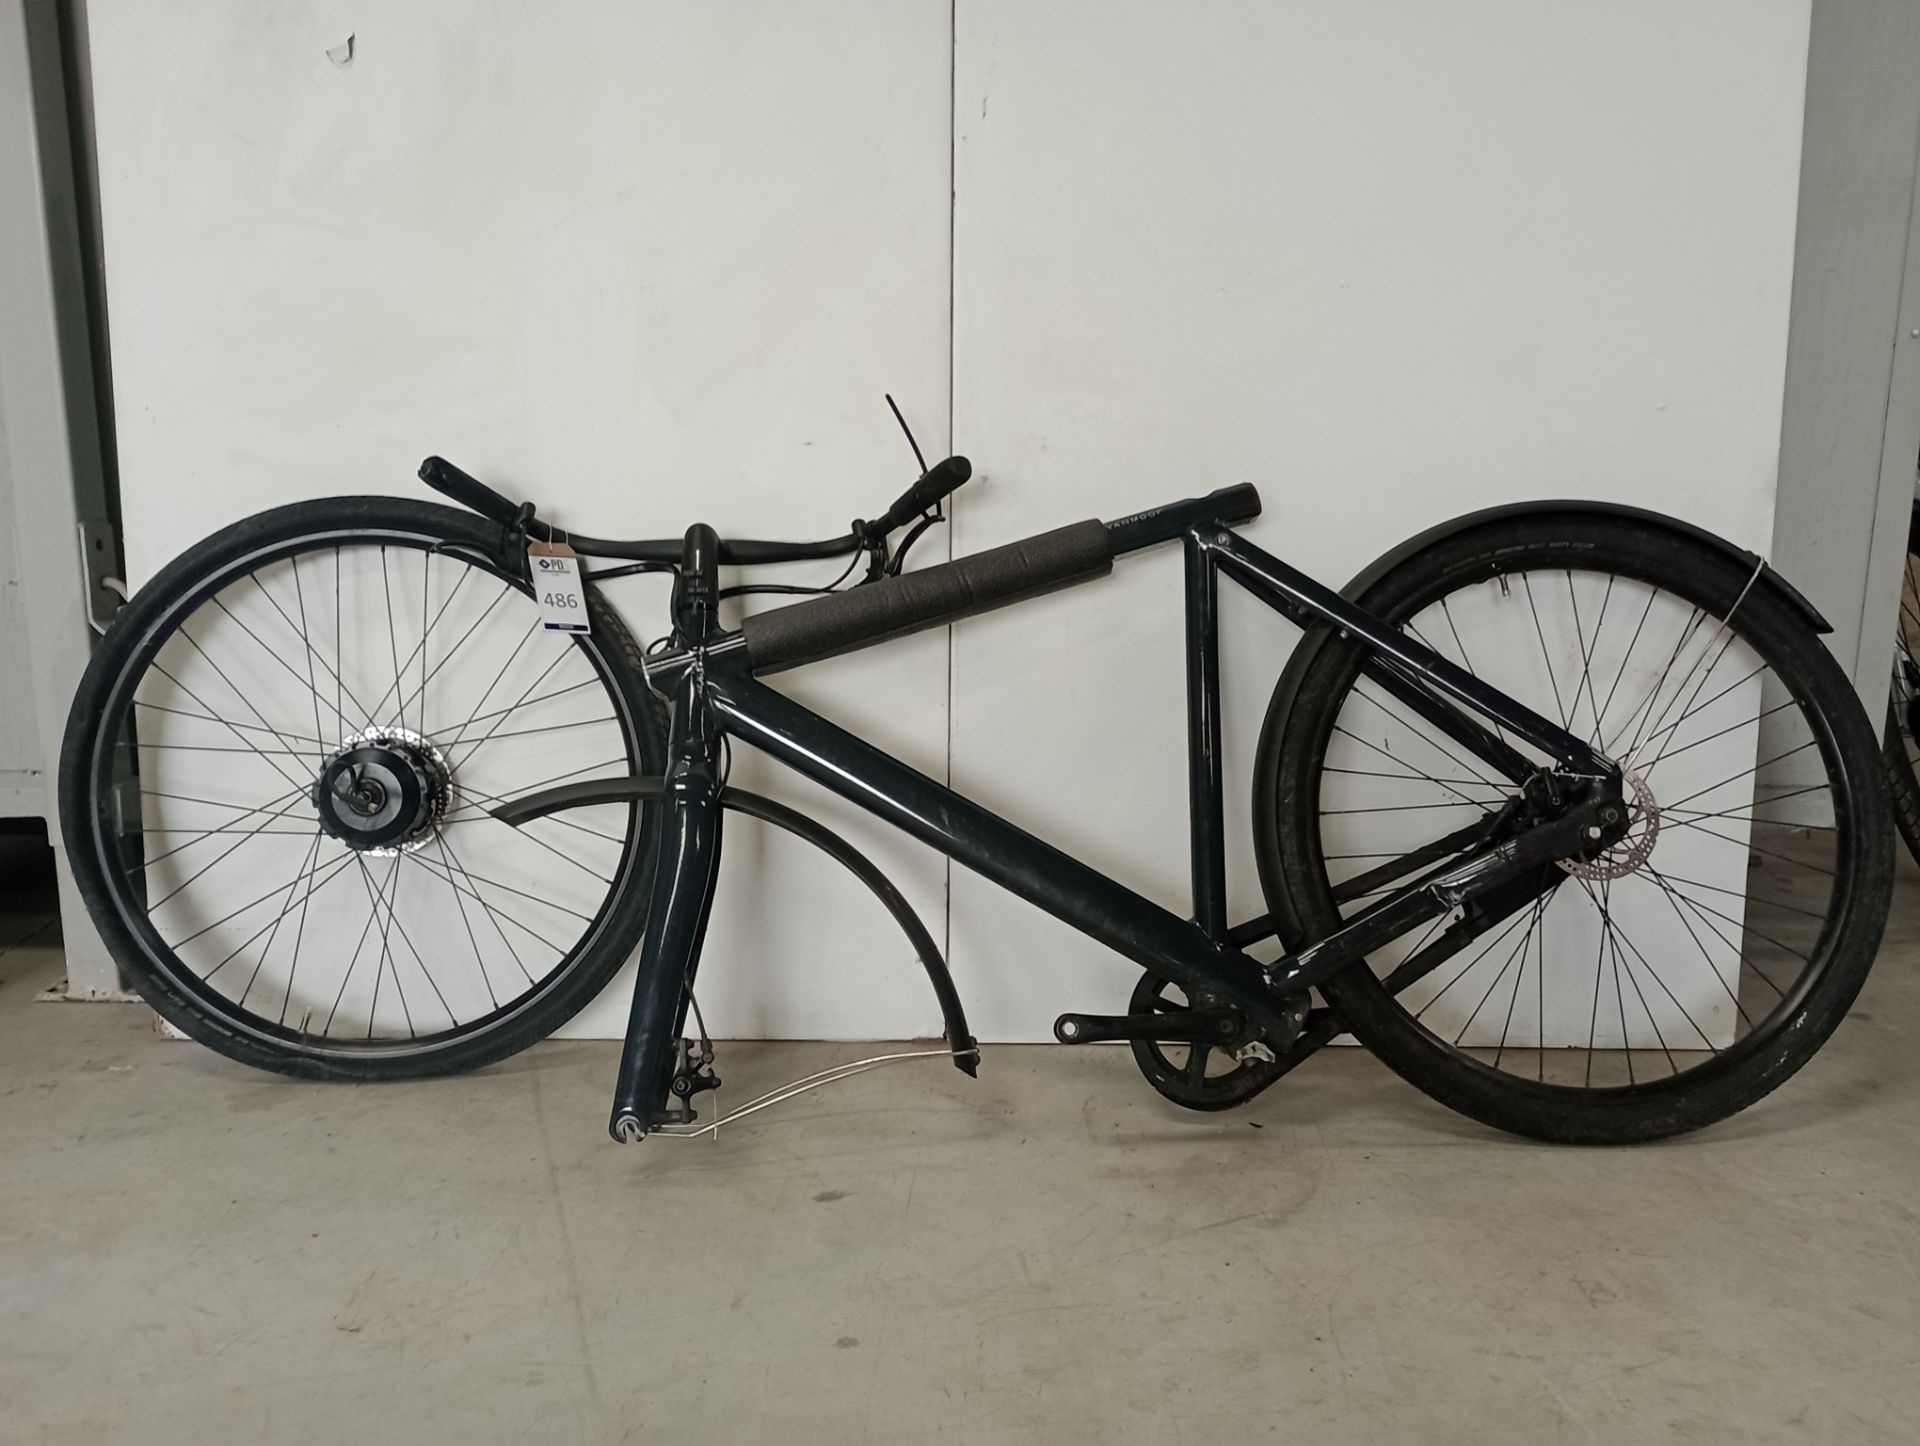 VanMoof S2 Electric Bike, Frame Number AST8802338 (NOT ROADWORTHY - FOR SPARES ONLY) (No codes